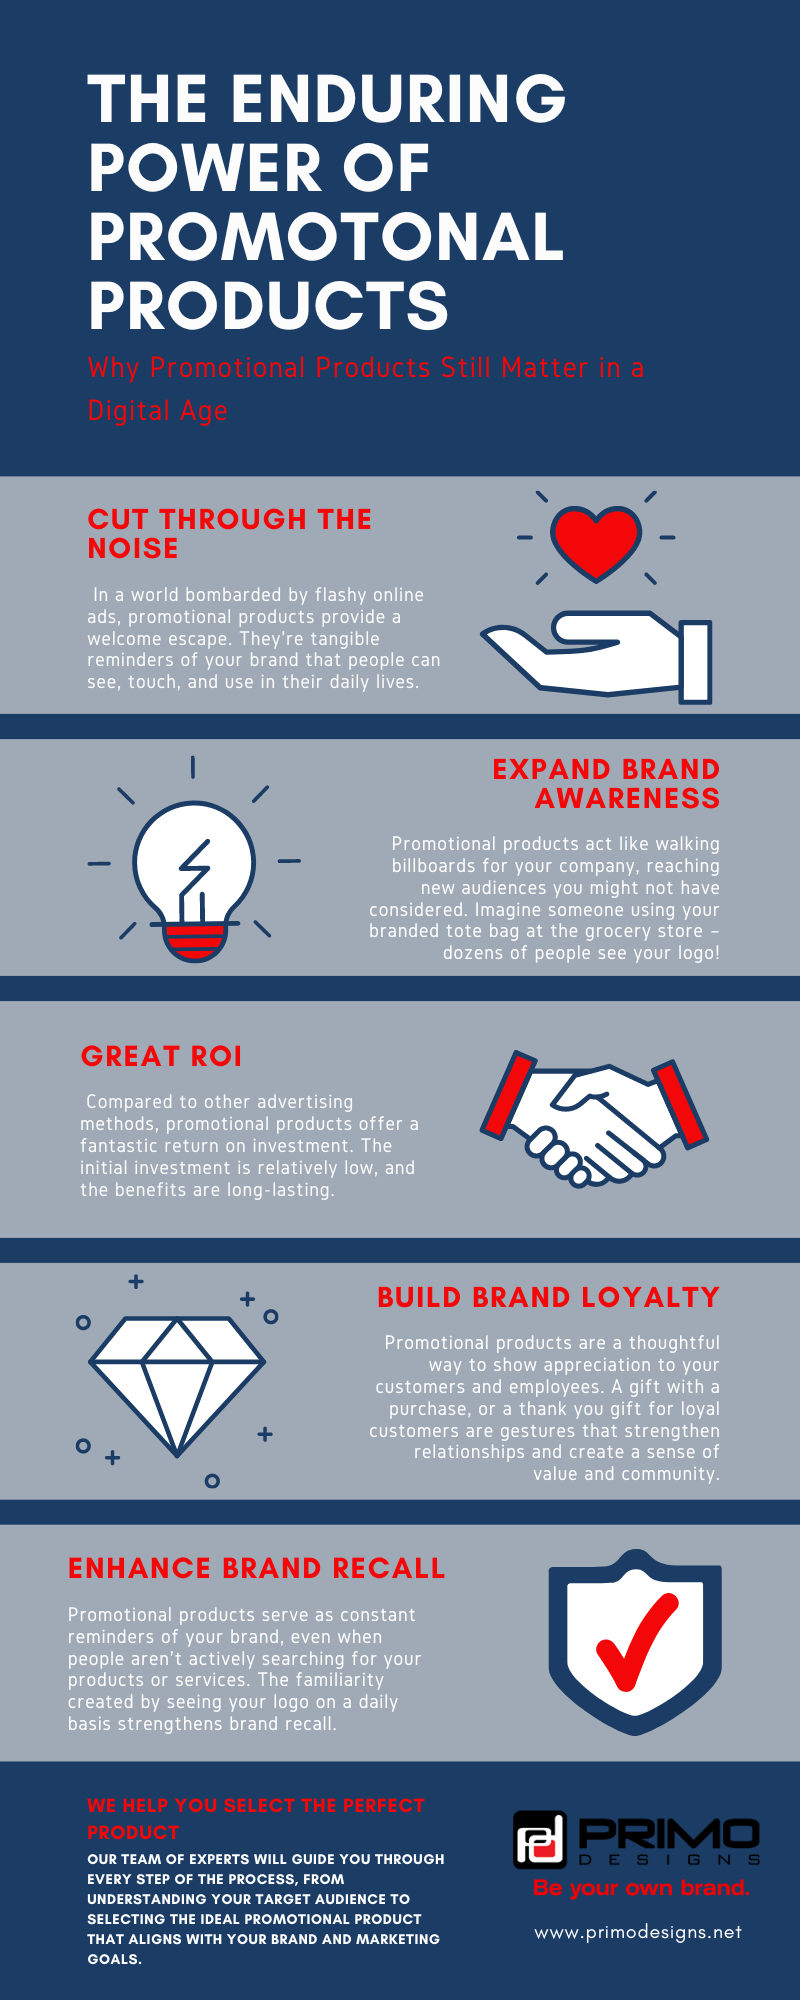 Infographic discussing the enduring power of promotional products